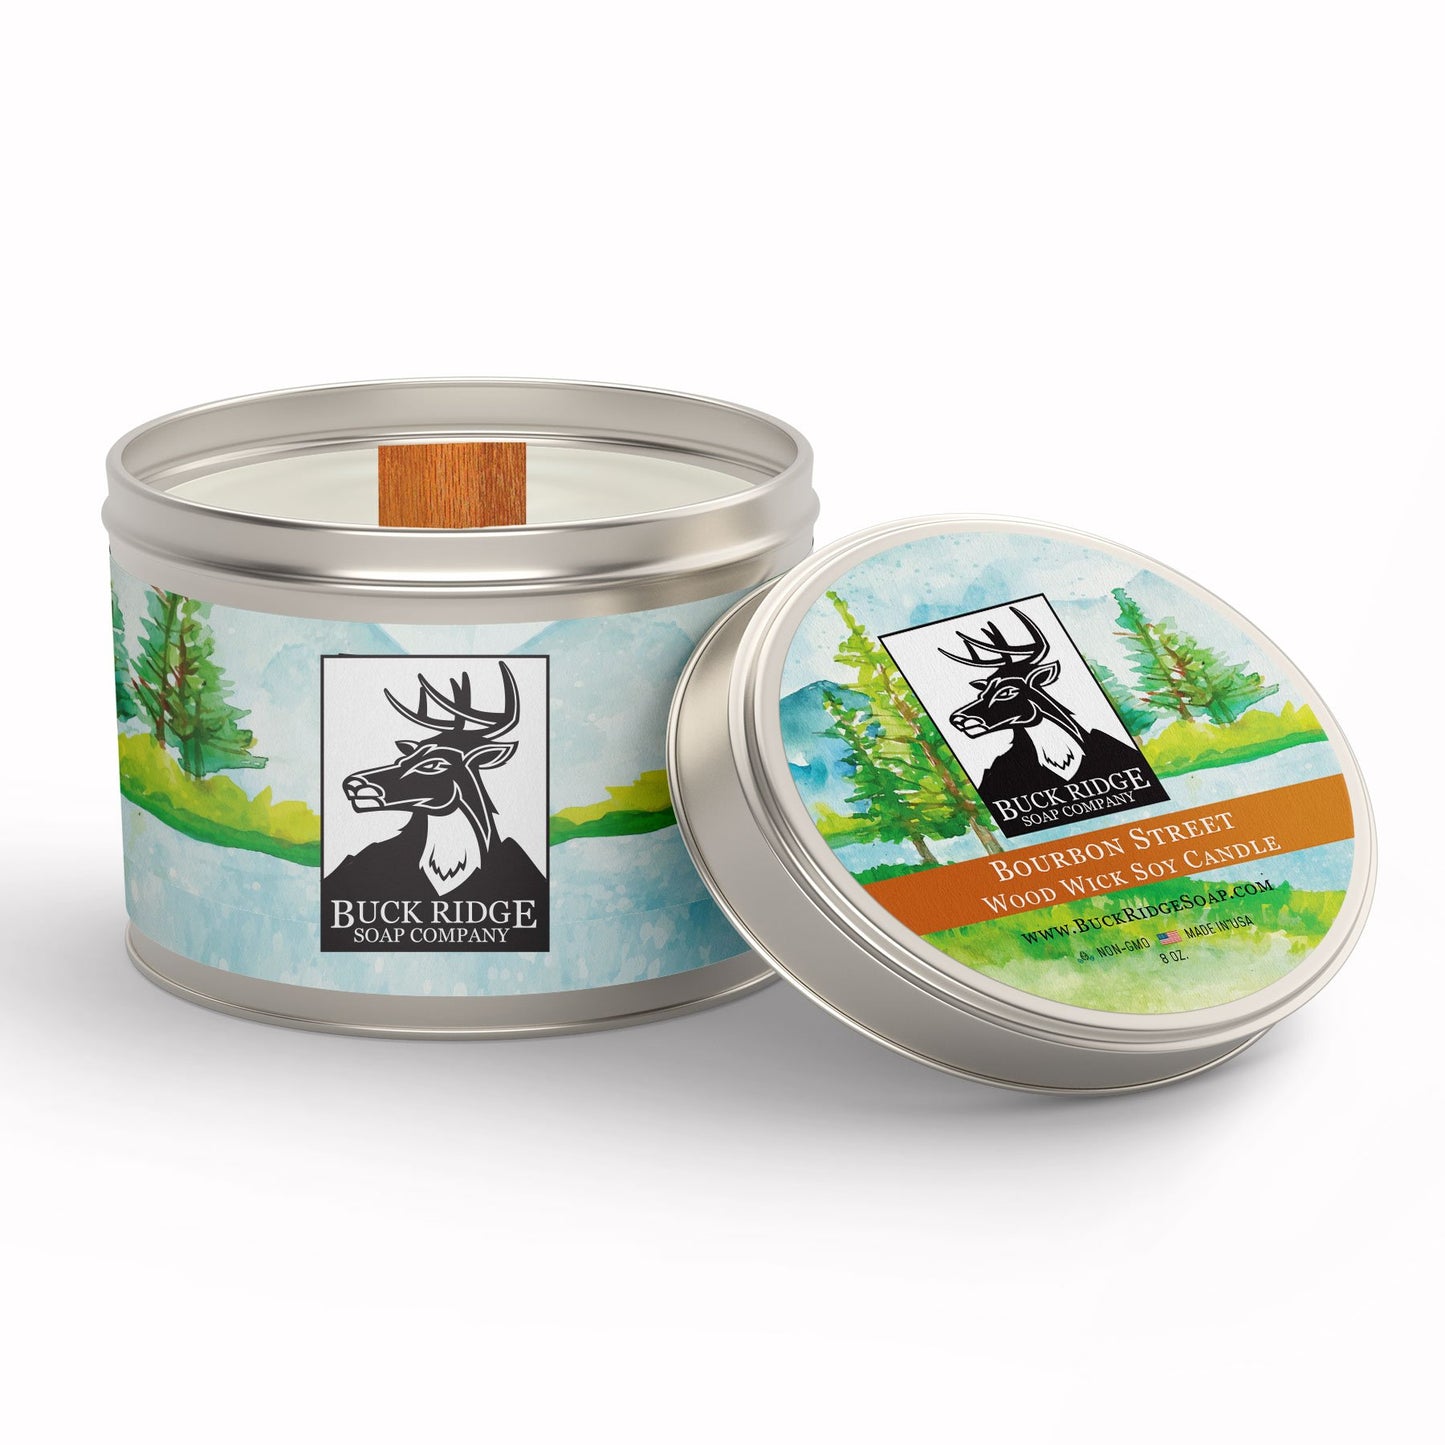 Bourbon Street Sustainable Wood Wick Soy Candle